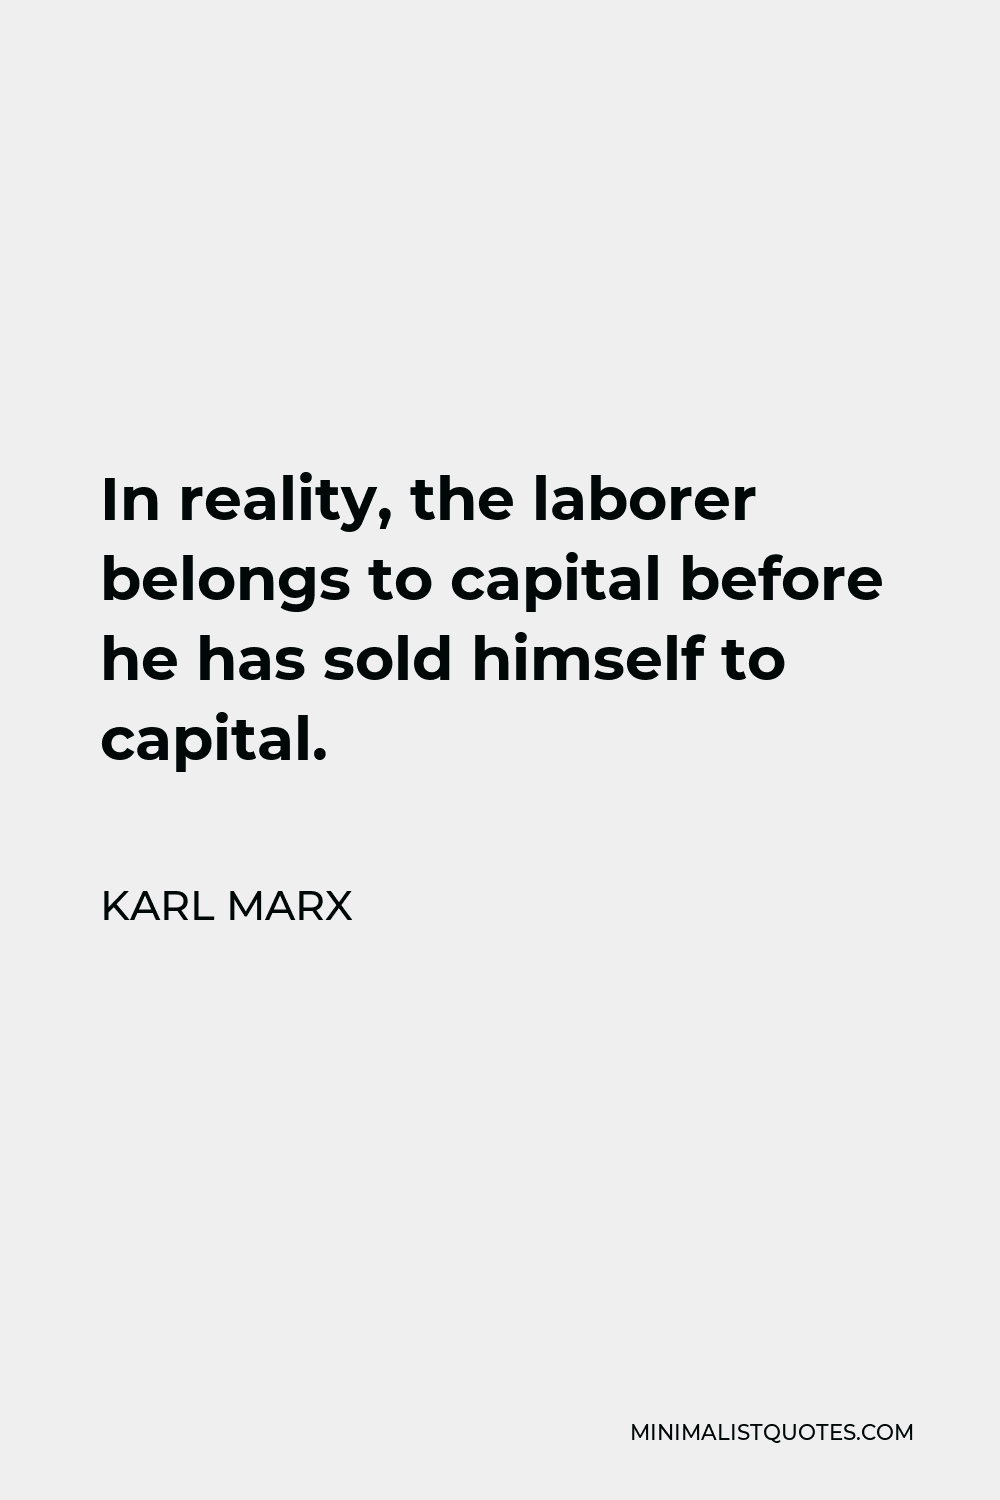 Karl Marx Quote - In reality, the laborer belongs to capital before he has sold himself to capital.